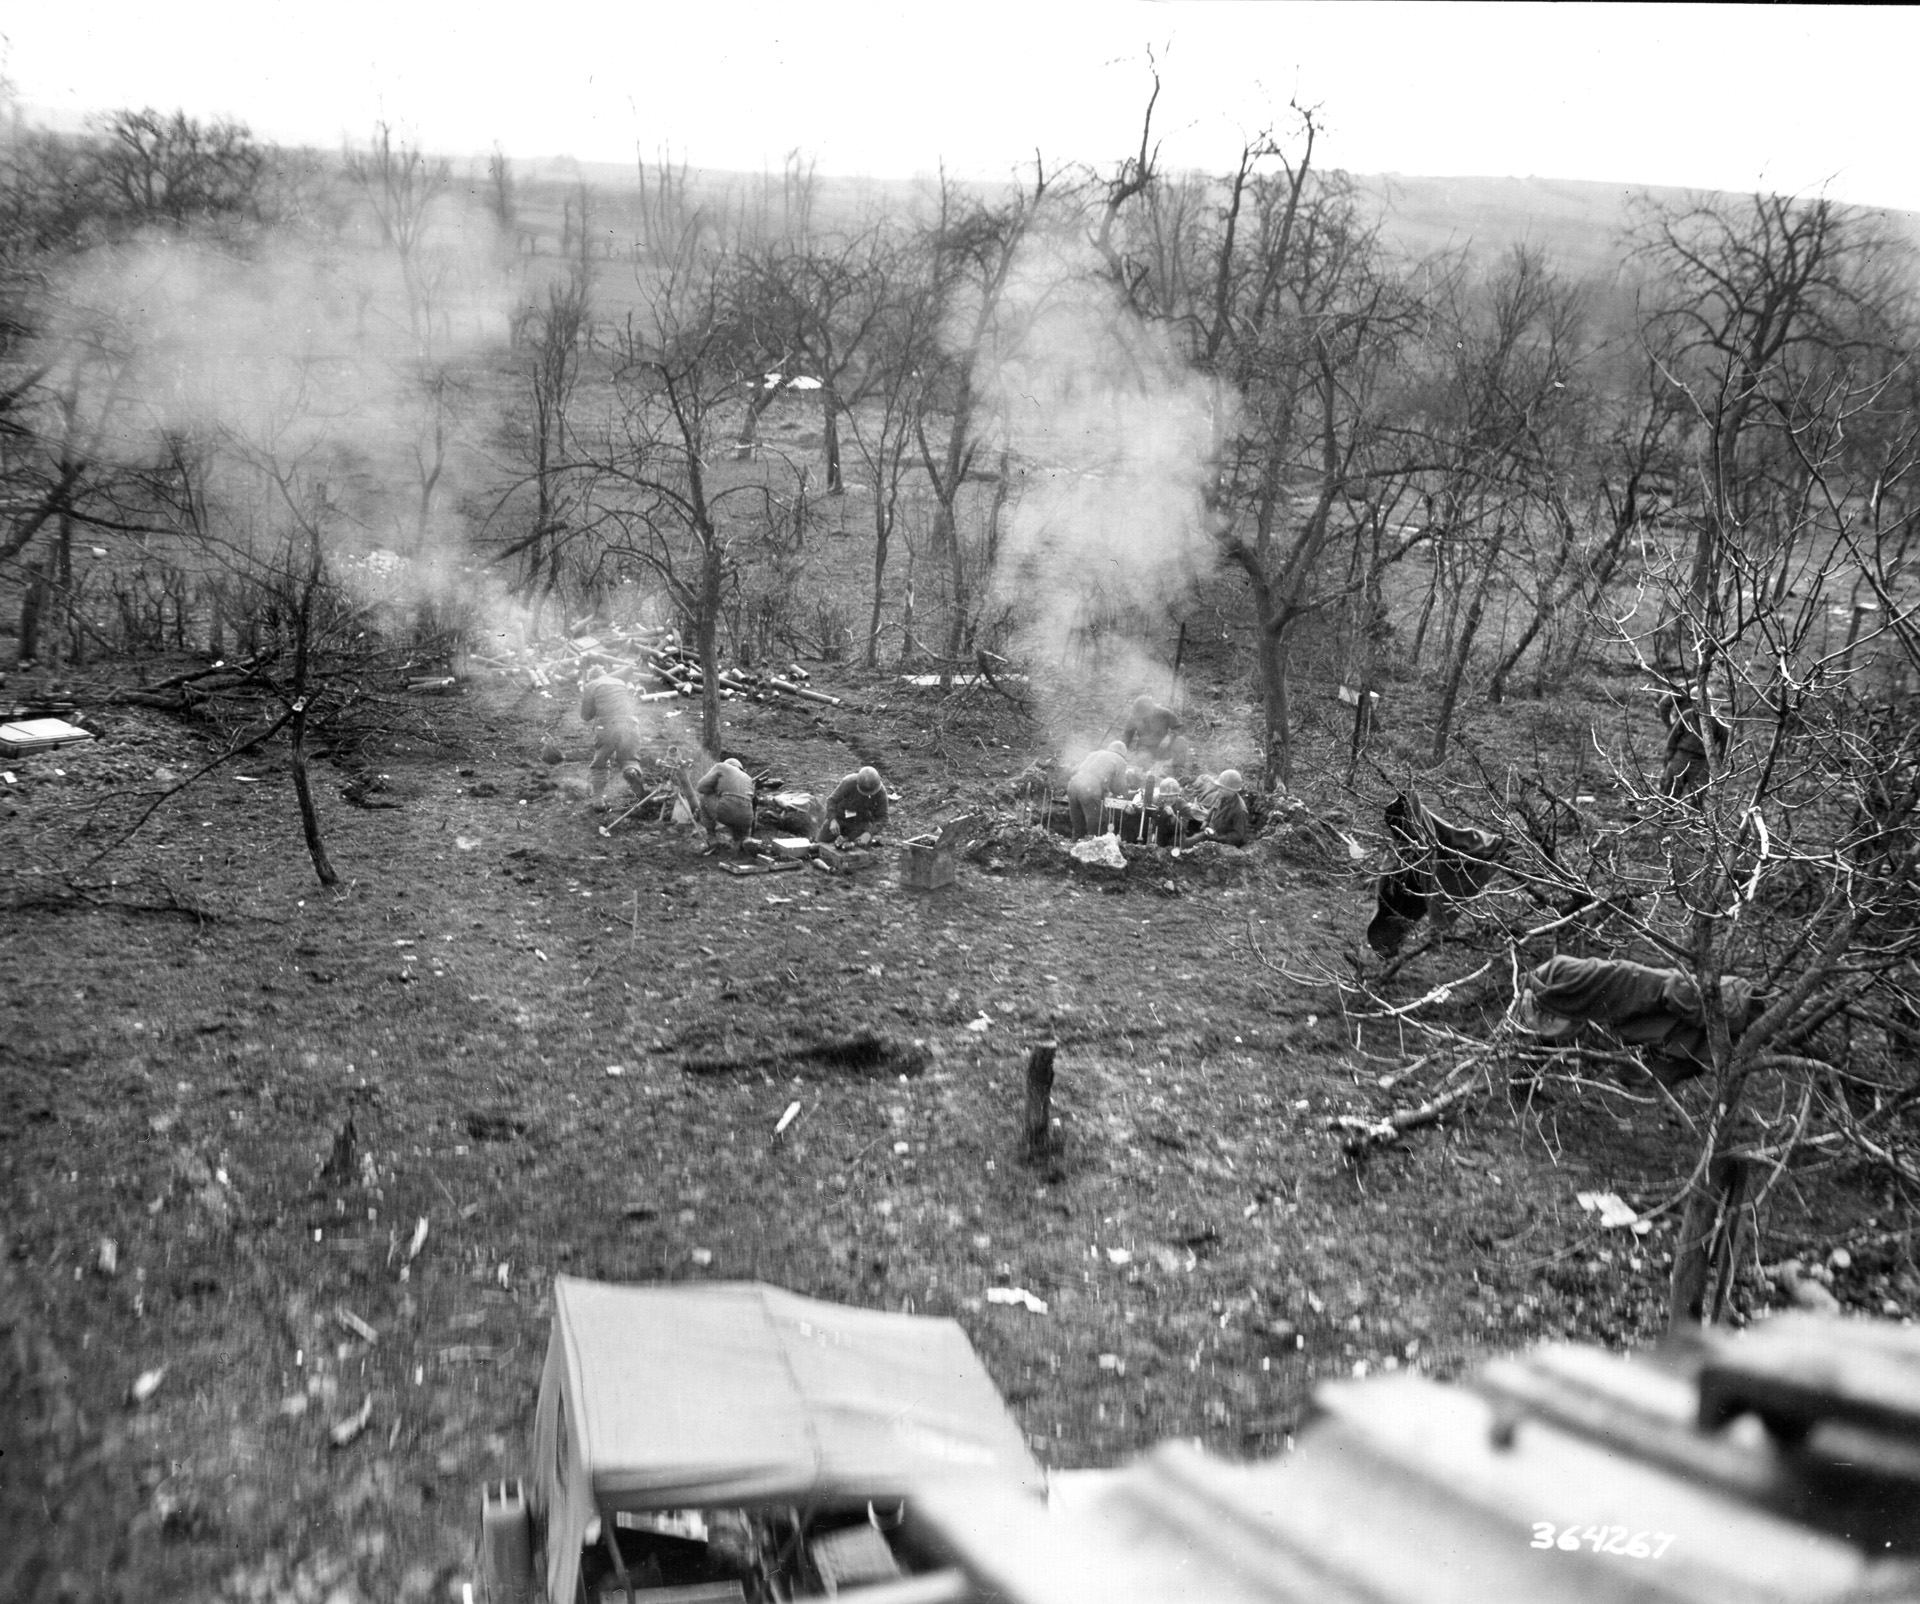 Mortarmen from the 44th Infantry Division, positioned near the 397th Regiment outside Rimling, fire their tubes—including a captured German mortar—on New Year’s Day 1945. Although the 44th's front crumbled, allowing the enemy to flank the 397th, the regiment refused to yield. 